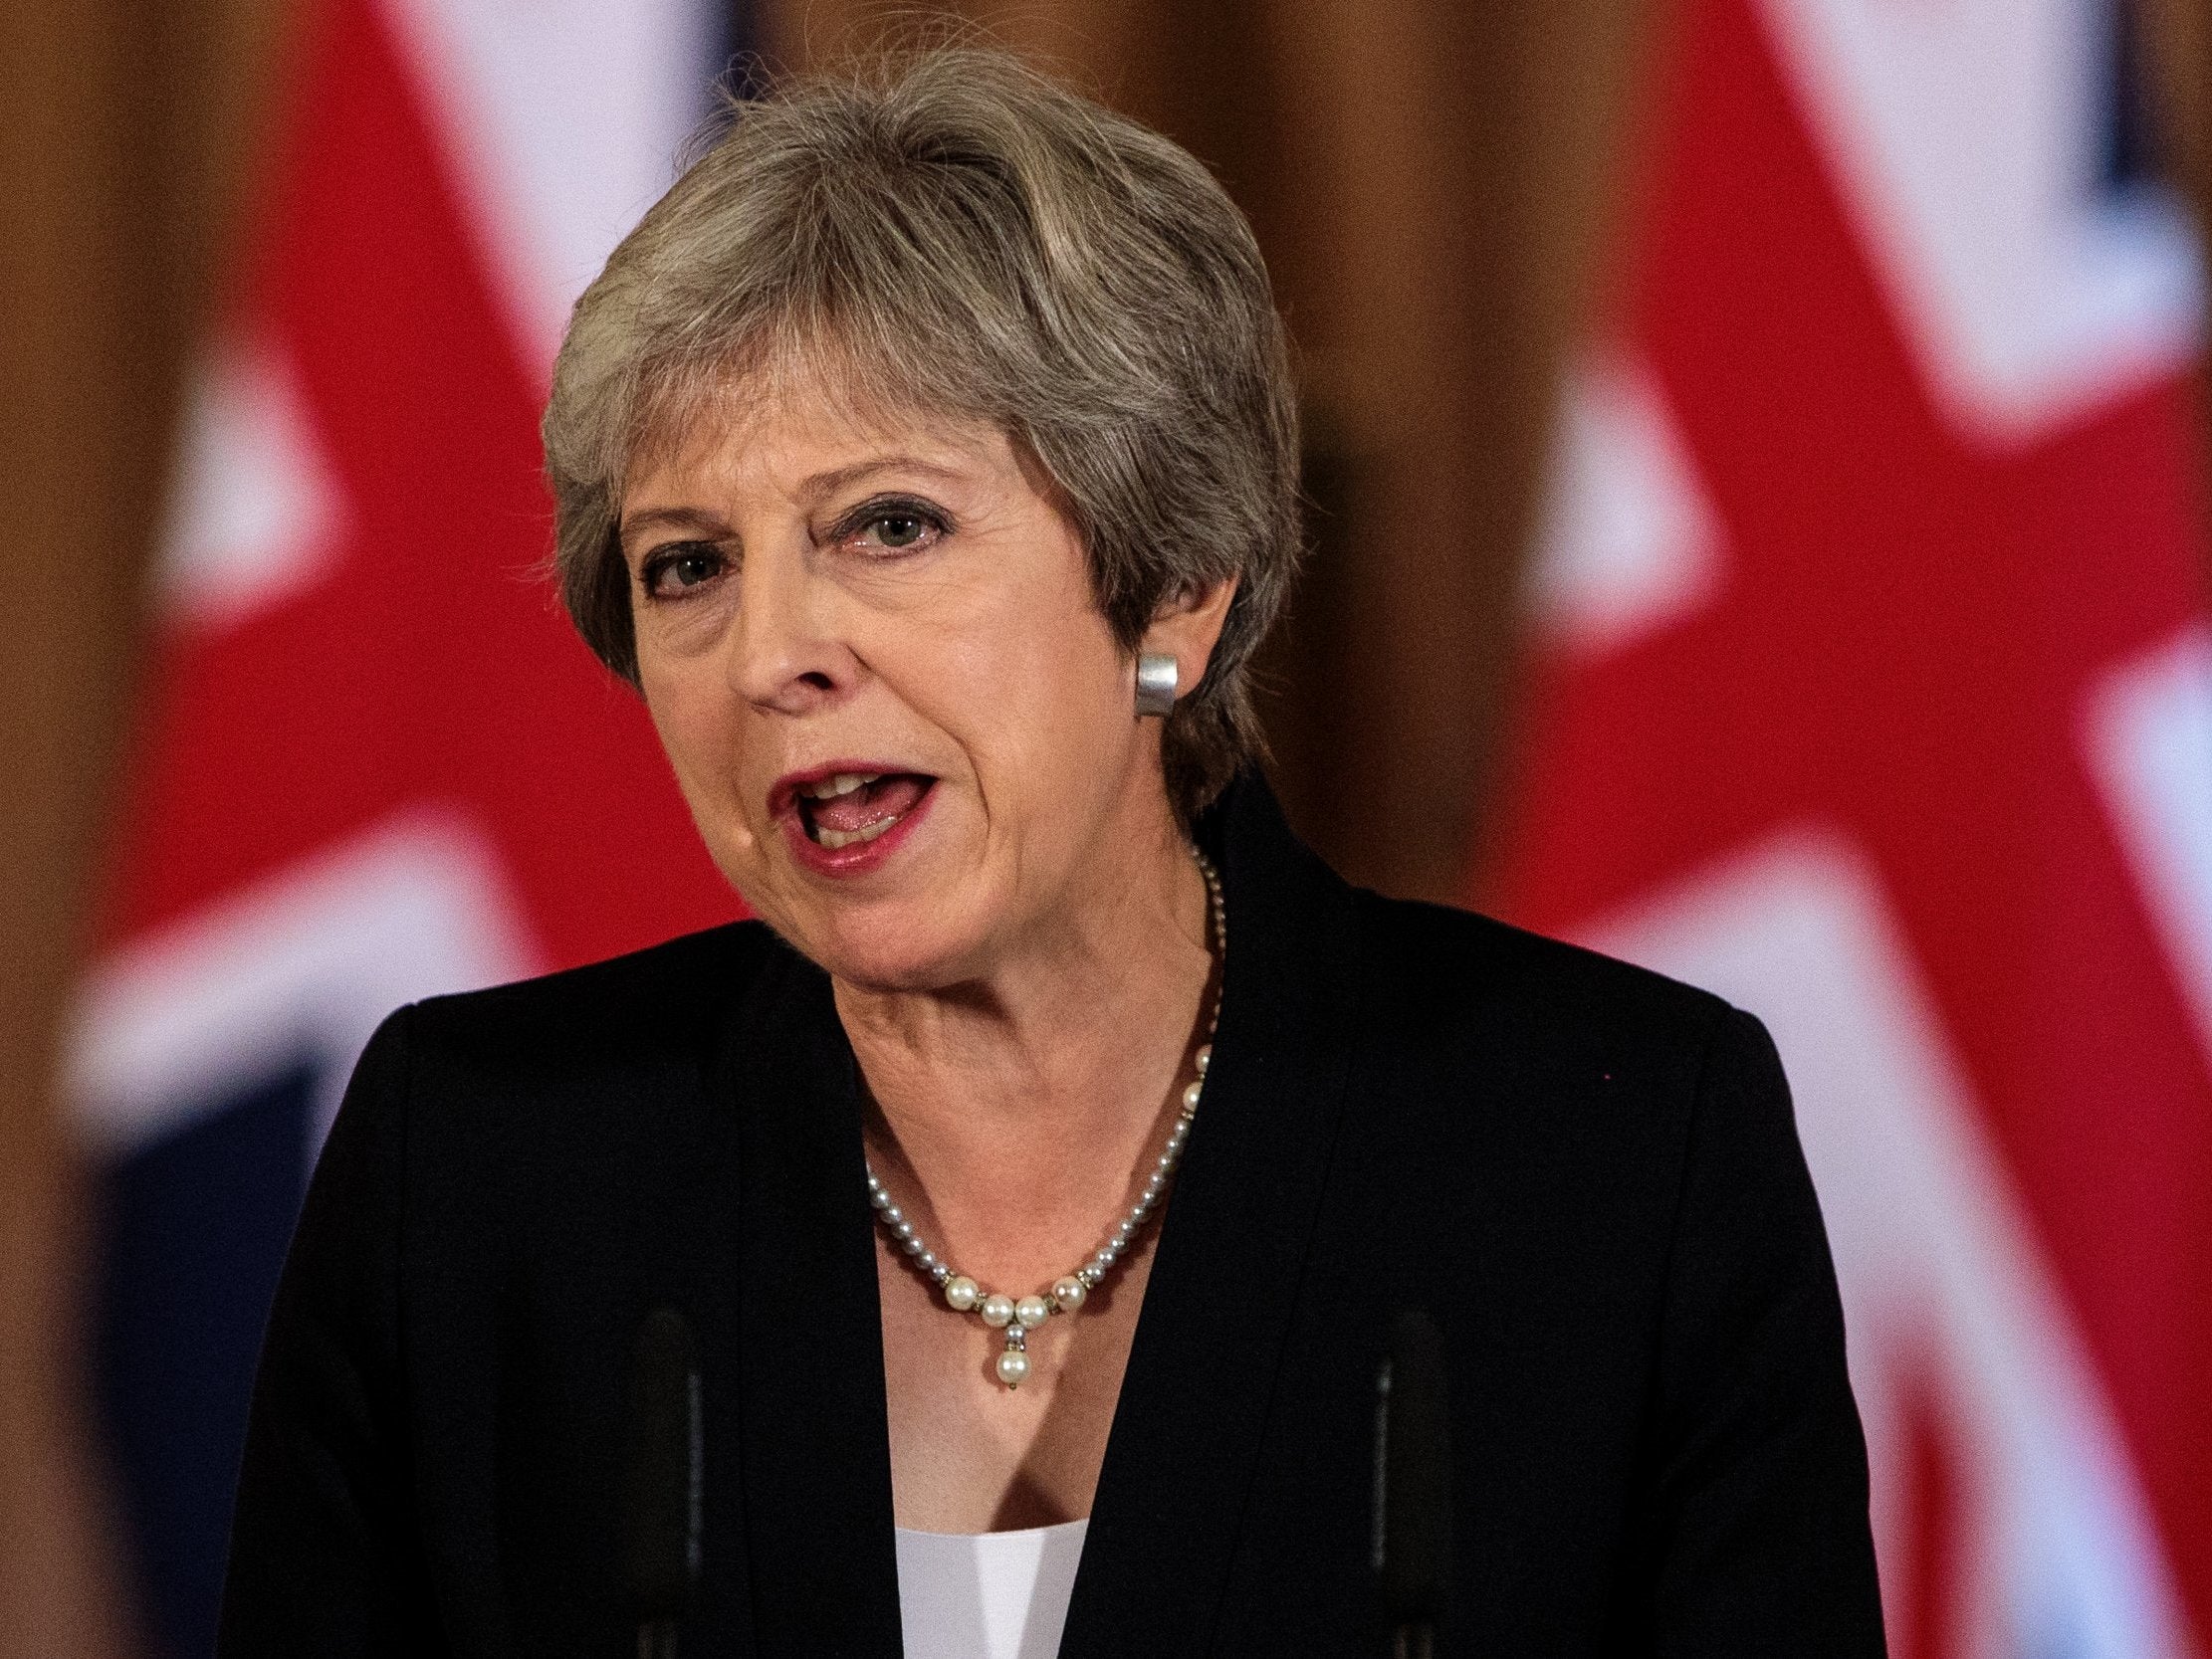 Ms May says 'despicable' attacks in Salisbury and rebel-held areas of Syria are a threat to the international system